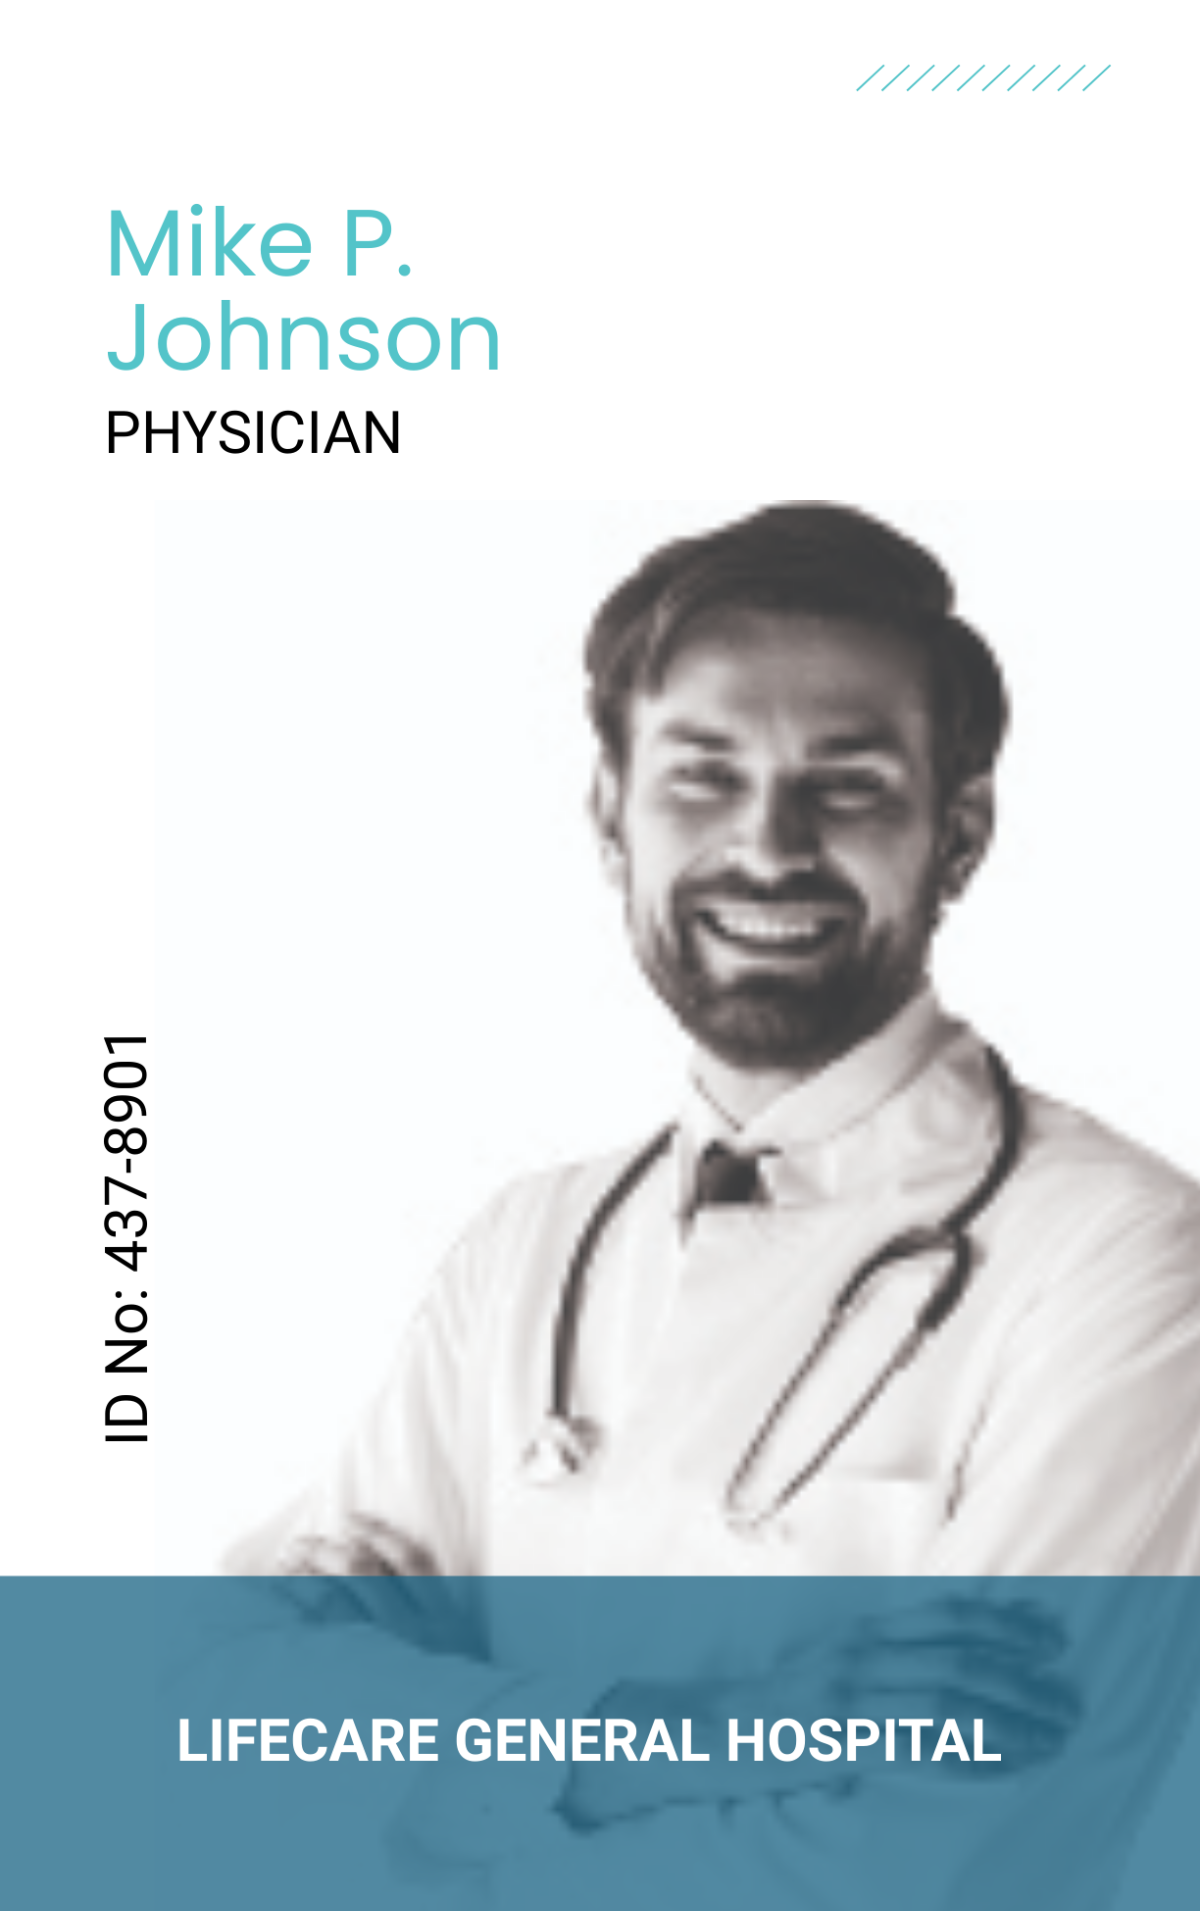 Physician ID Card Template